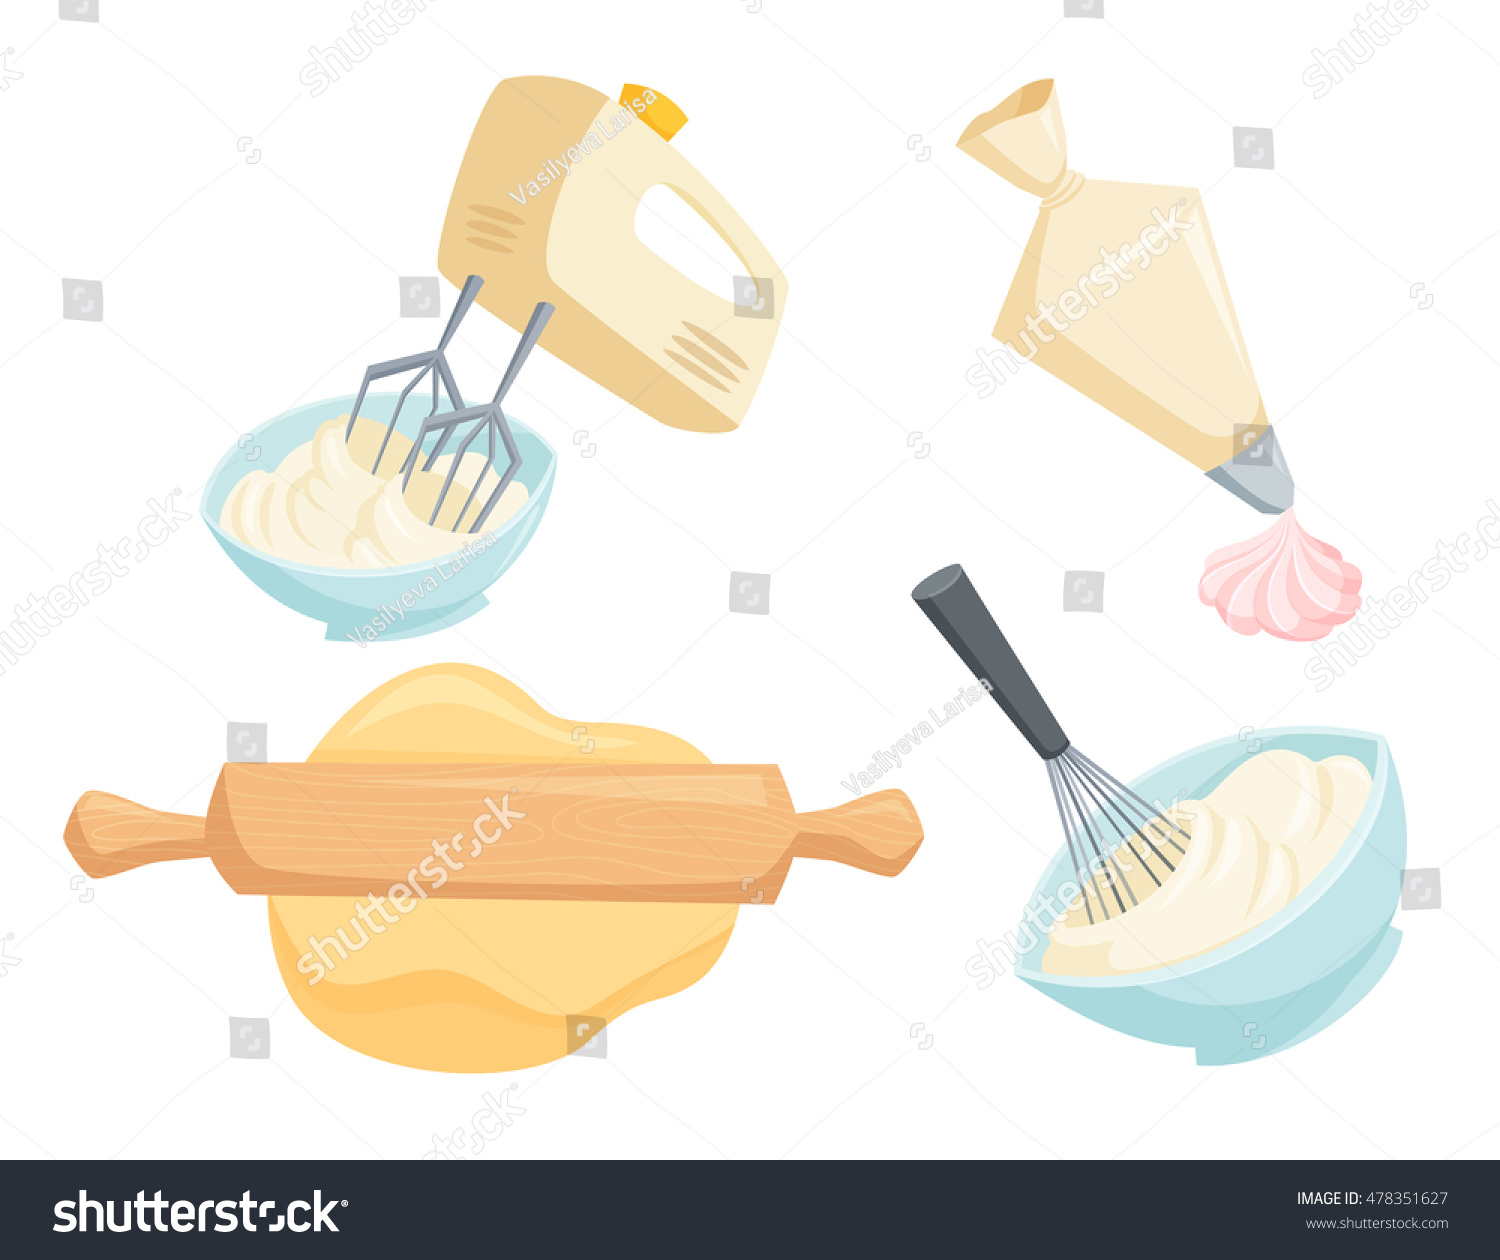 SVG of Baking set. Mixer or whisk whipped cream, roll out dough with rolling pin, decorate cakes with cream from pastry bag. Bakery process vector illustration. Kitchenware, cooking utensil isolated on white svg